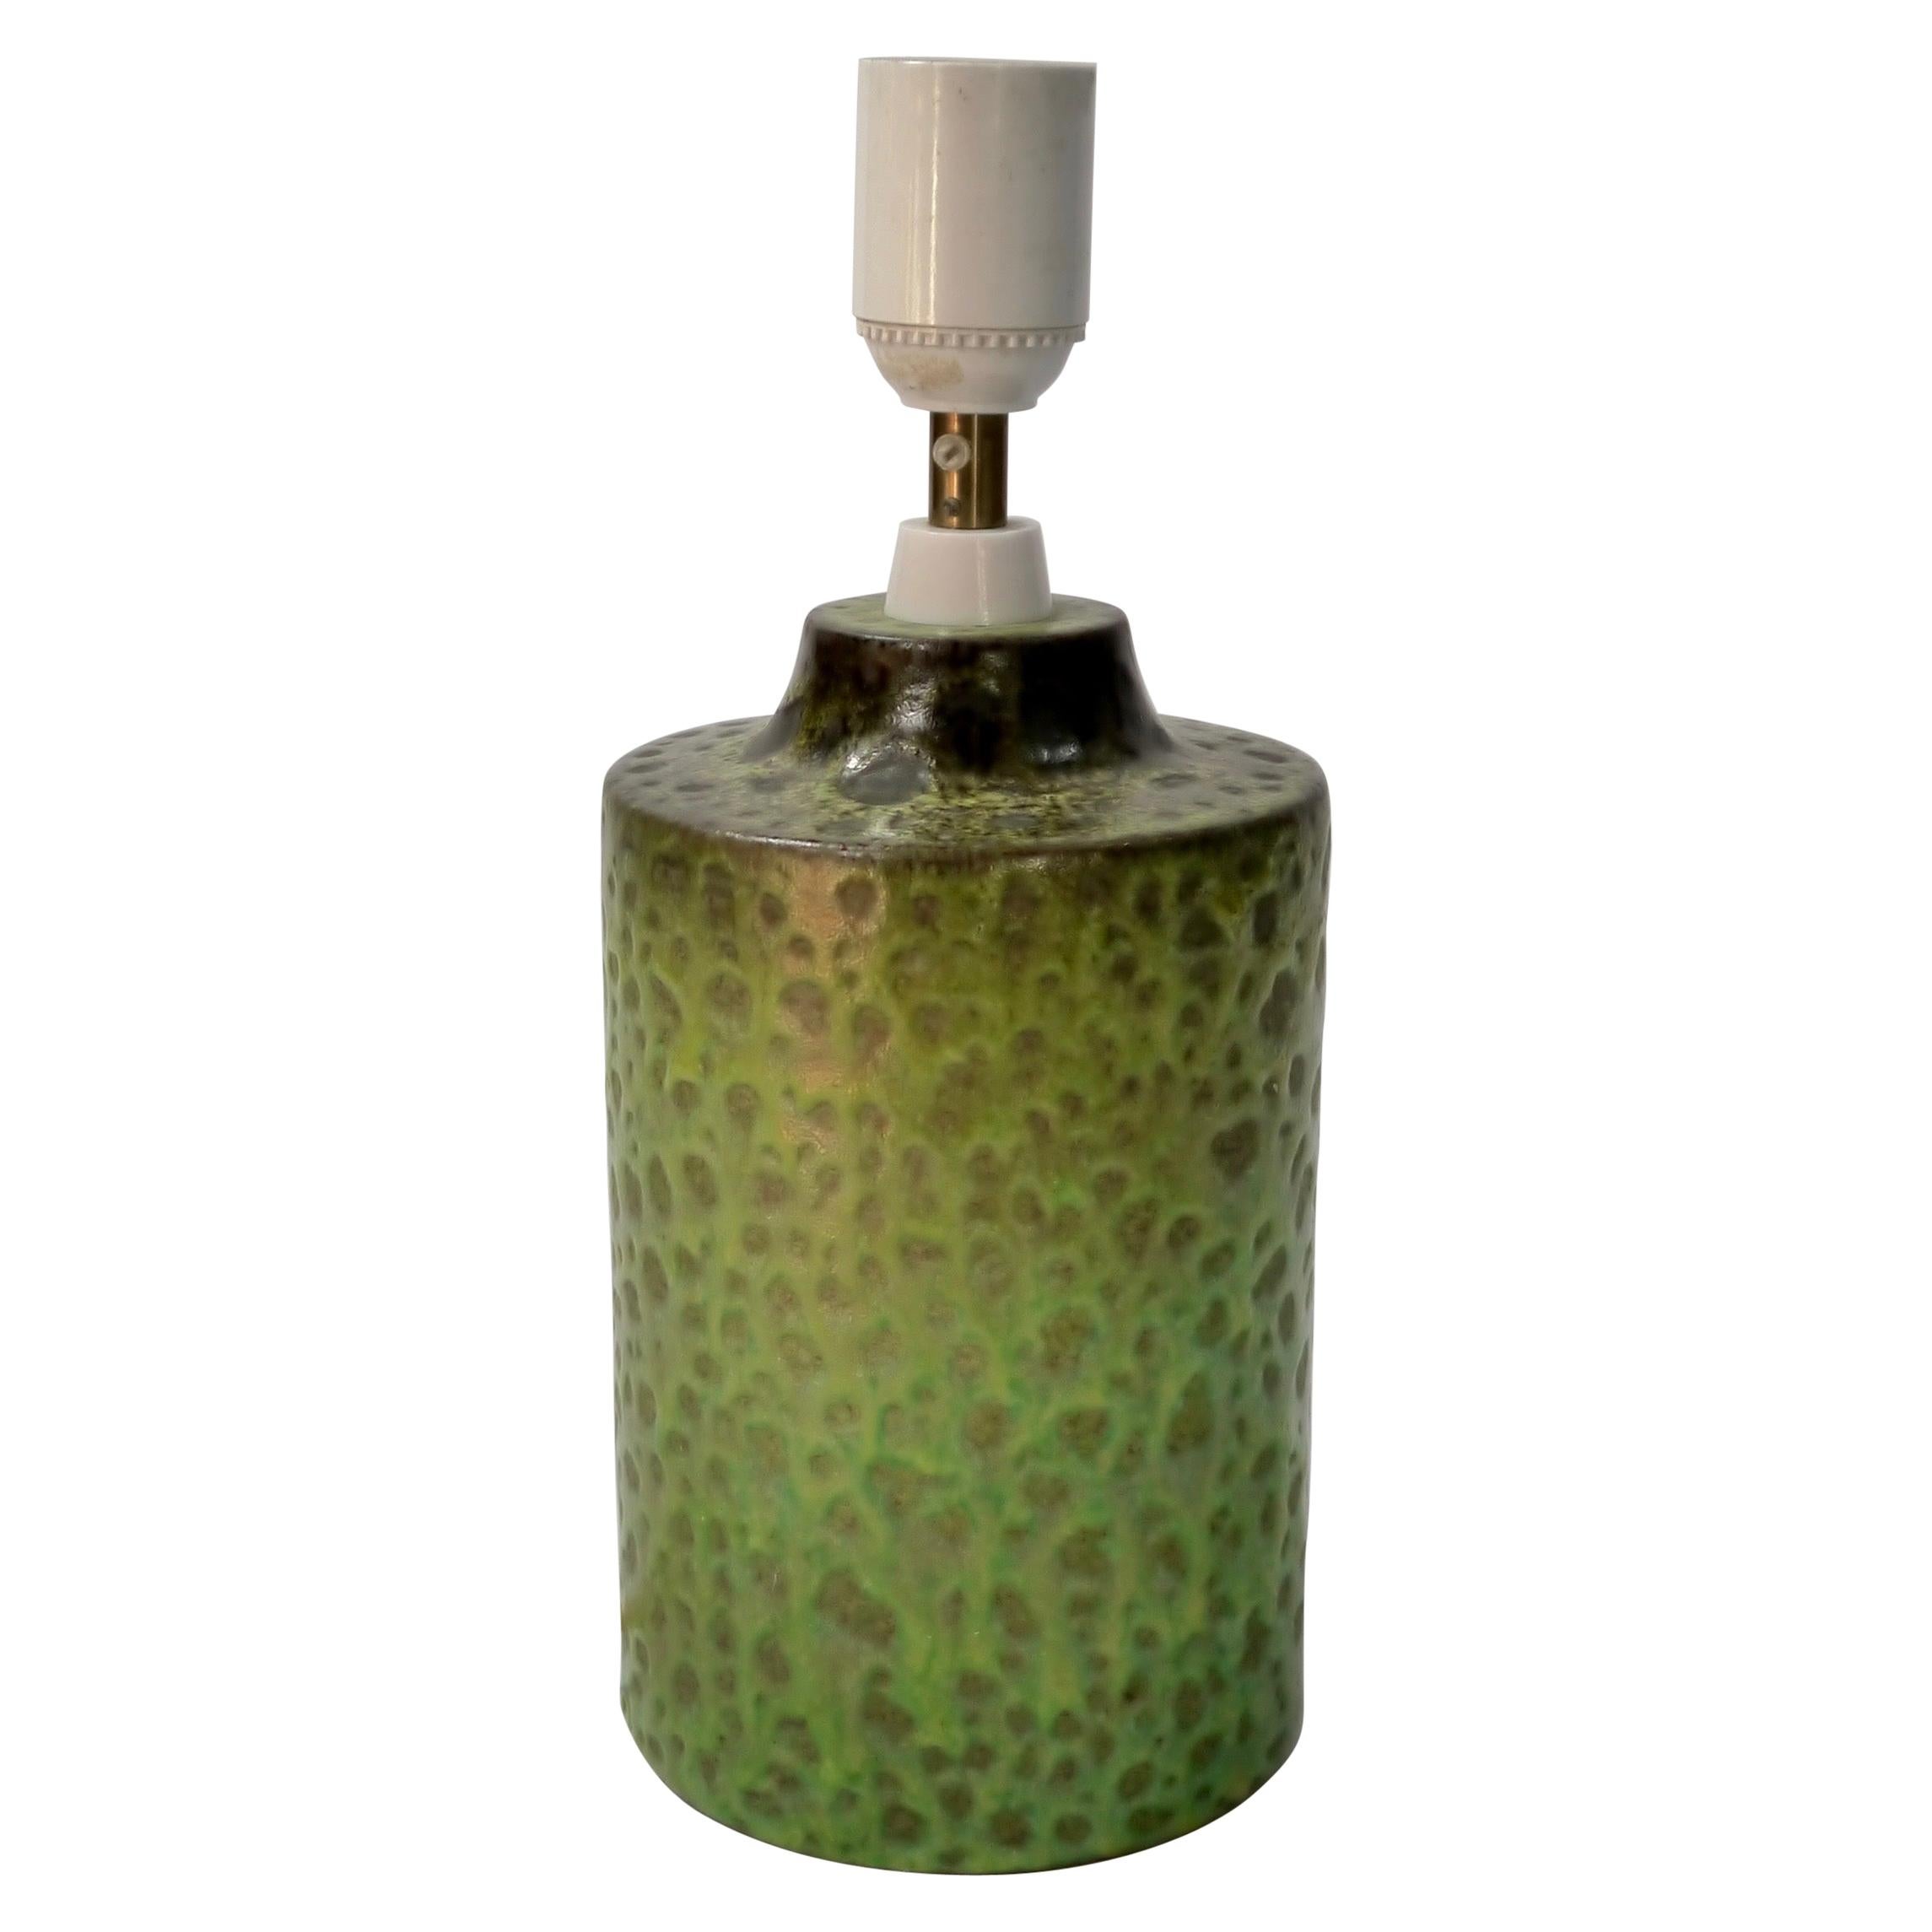 Green Spotted Ceramic Table Lamp by Bitossi, Italy, 1960s For Sale